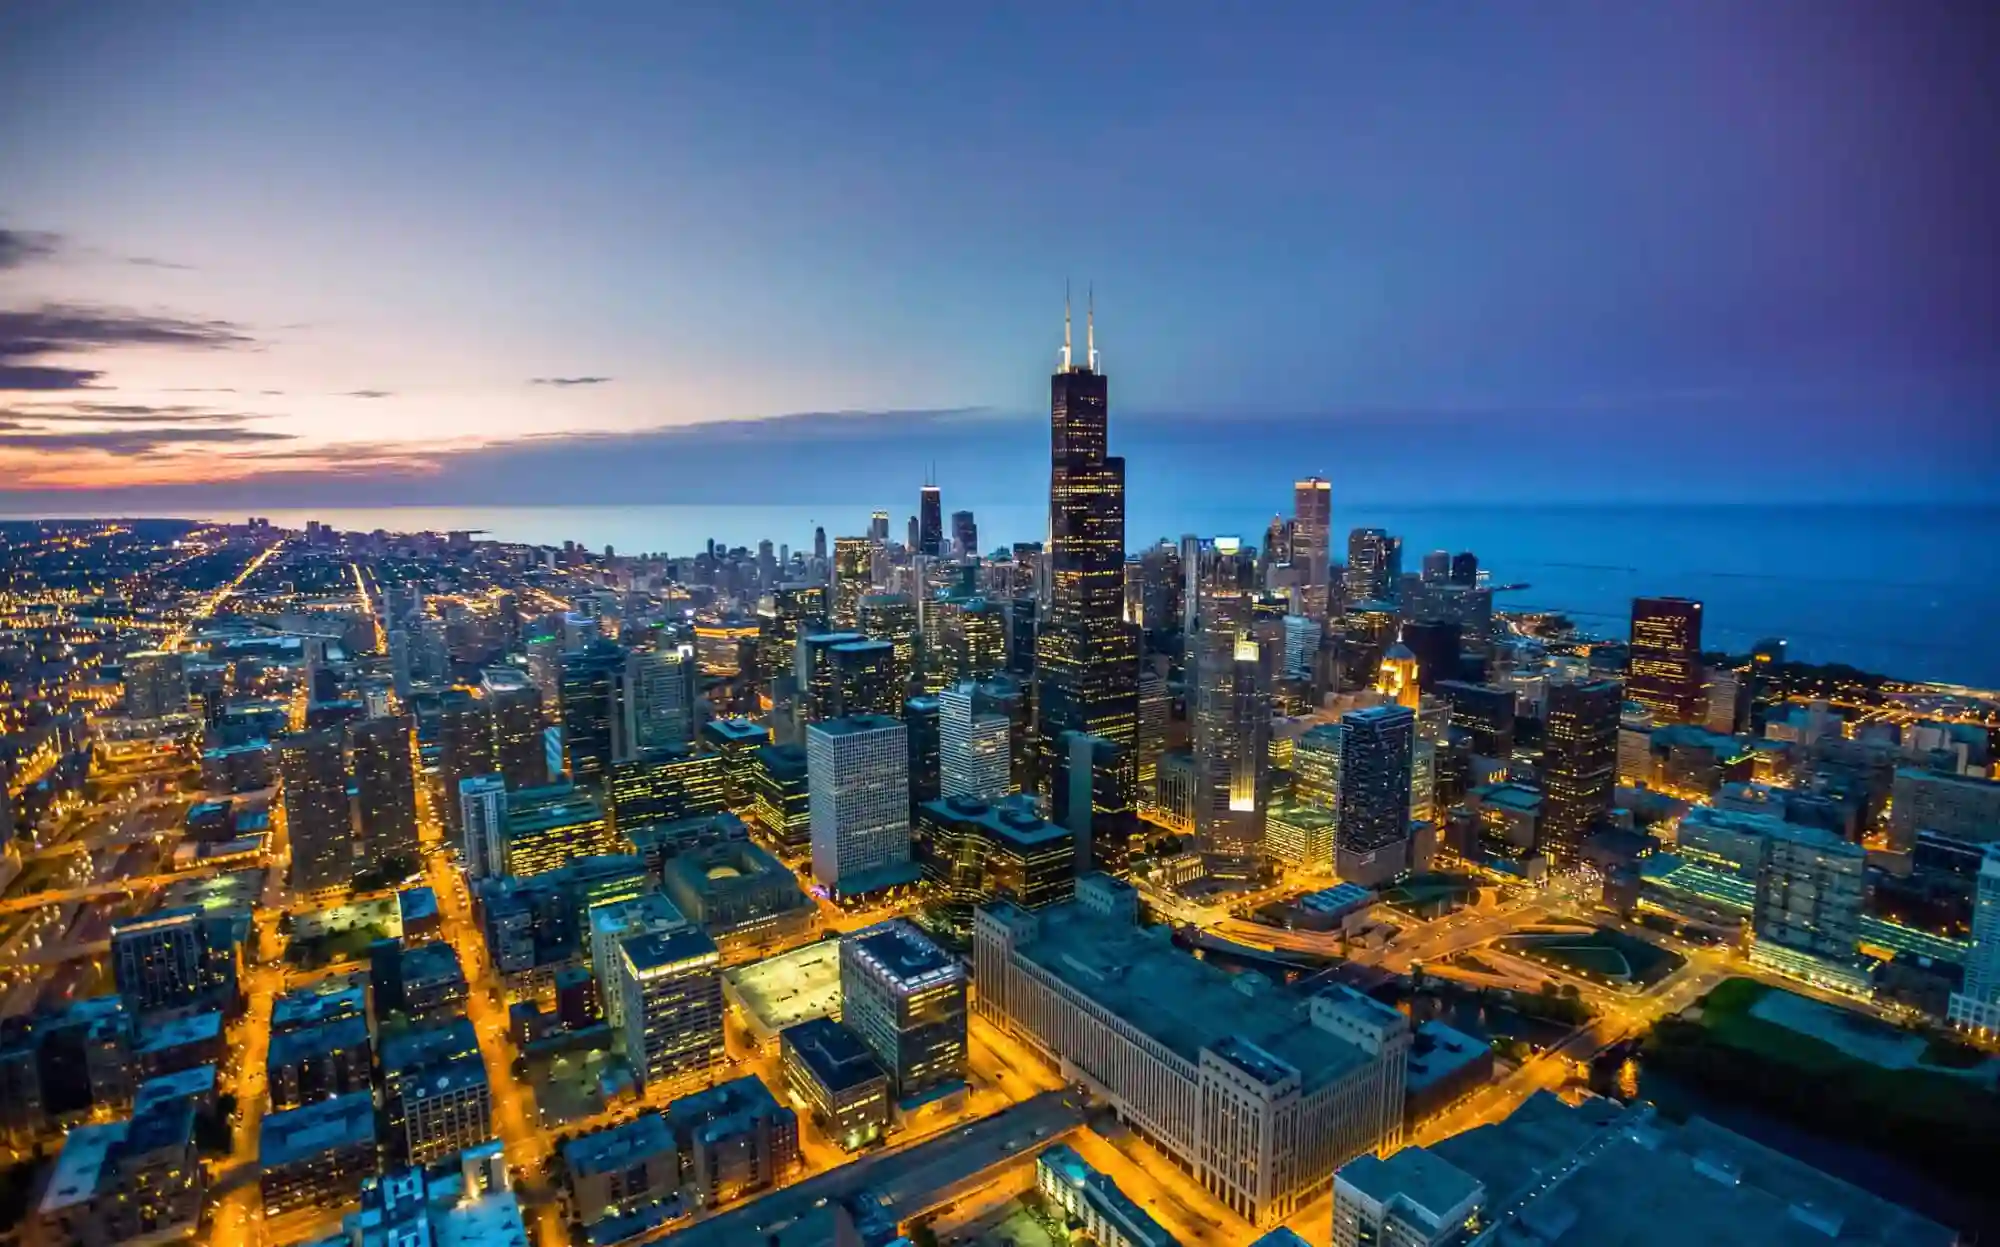 Overhead view of Chicago skyline at night.